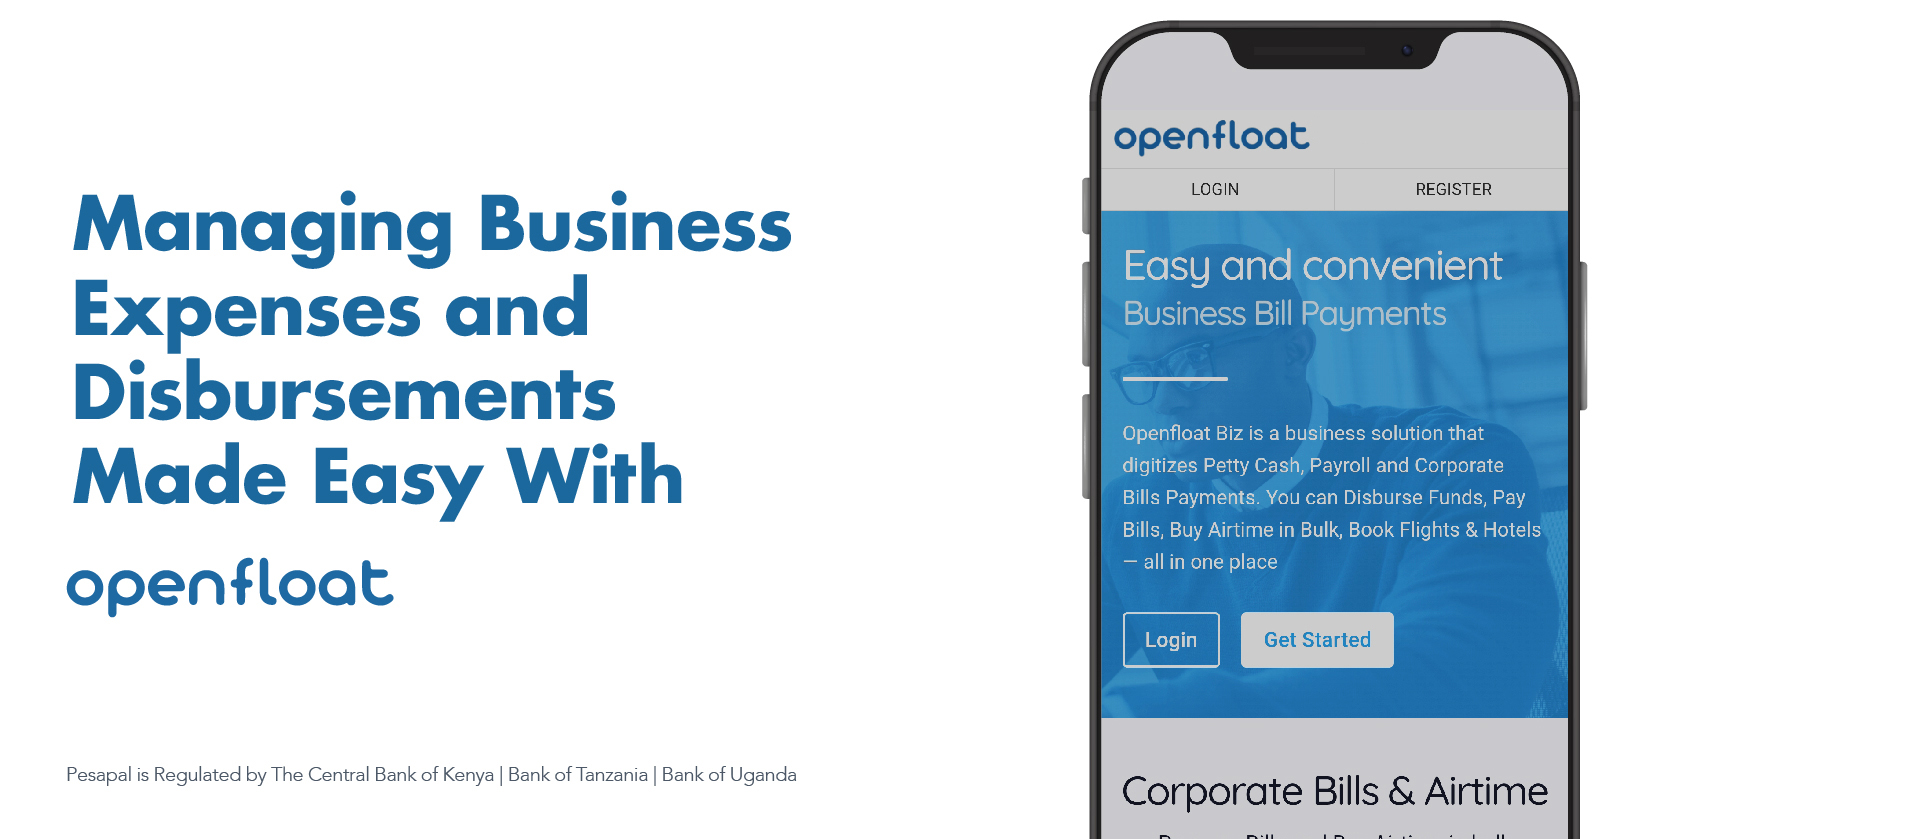 Managing Business Expenses and Disbursements Made Easy with Openfloat by Pesapal